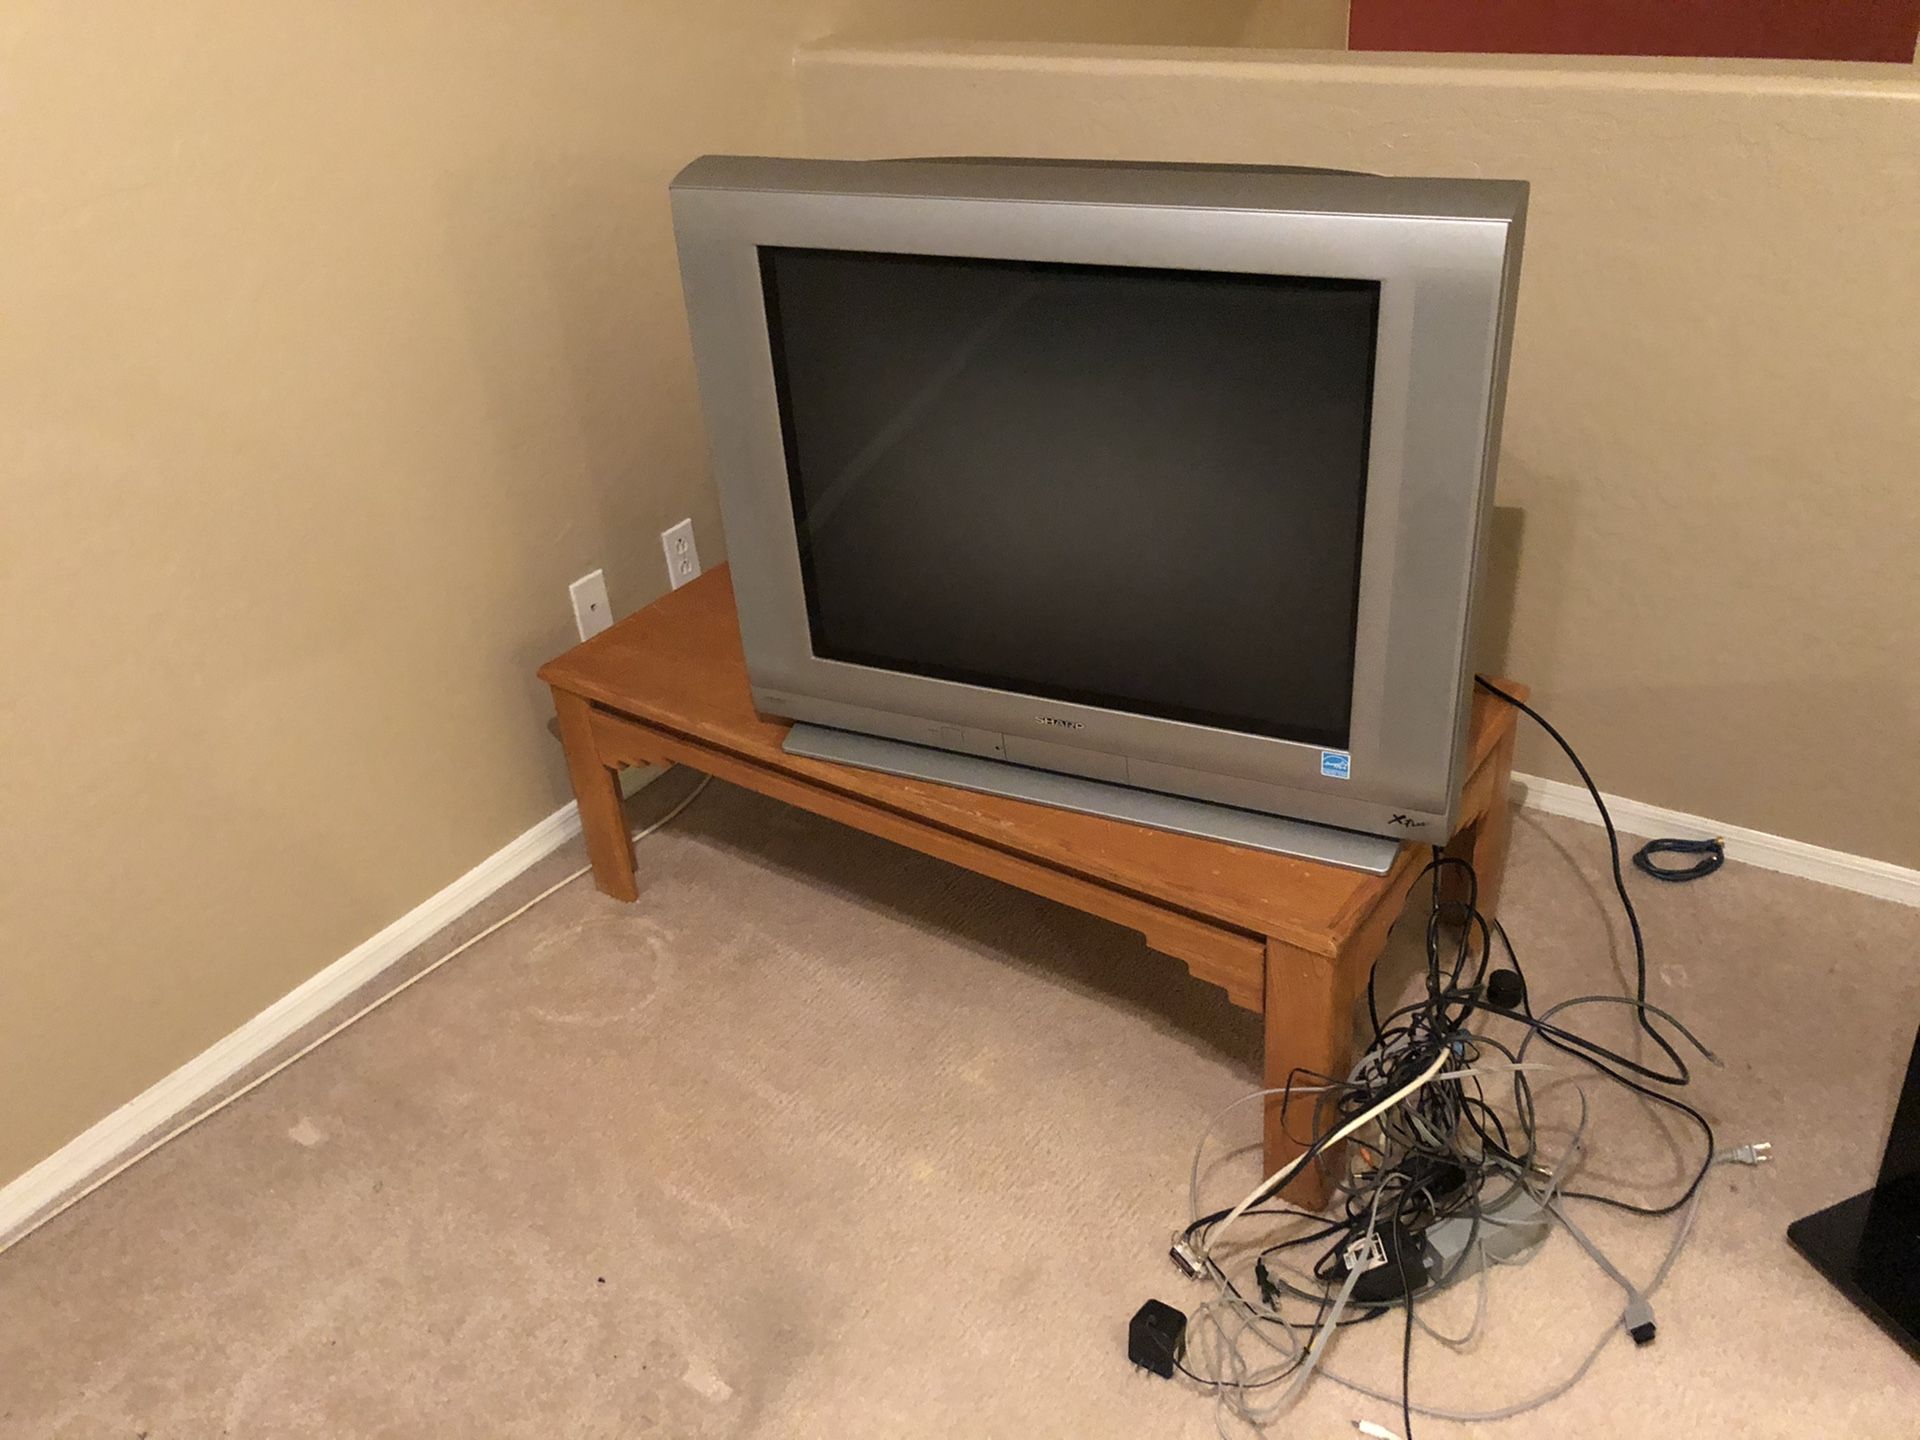 FREE TV - Still available!! Pick up today!!